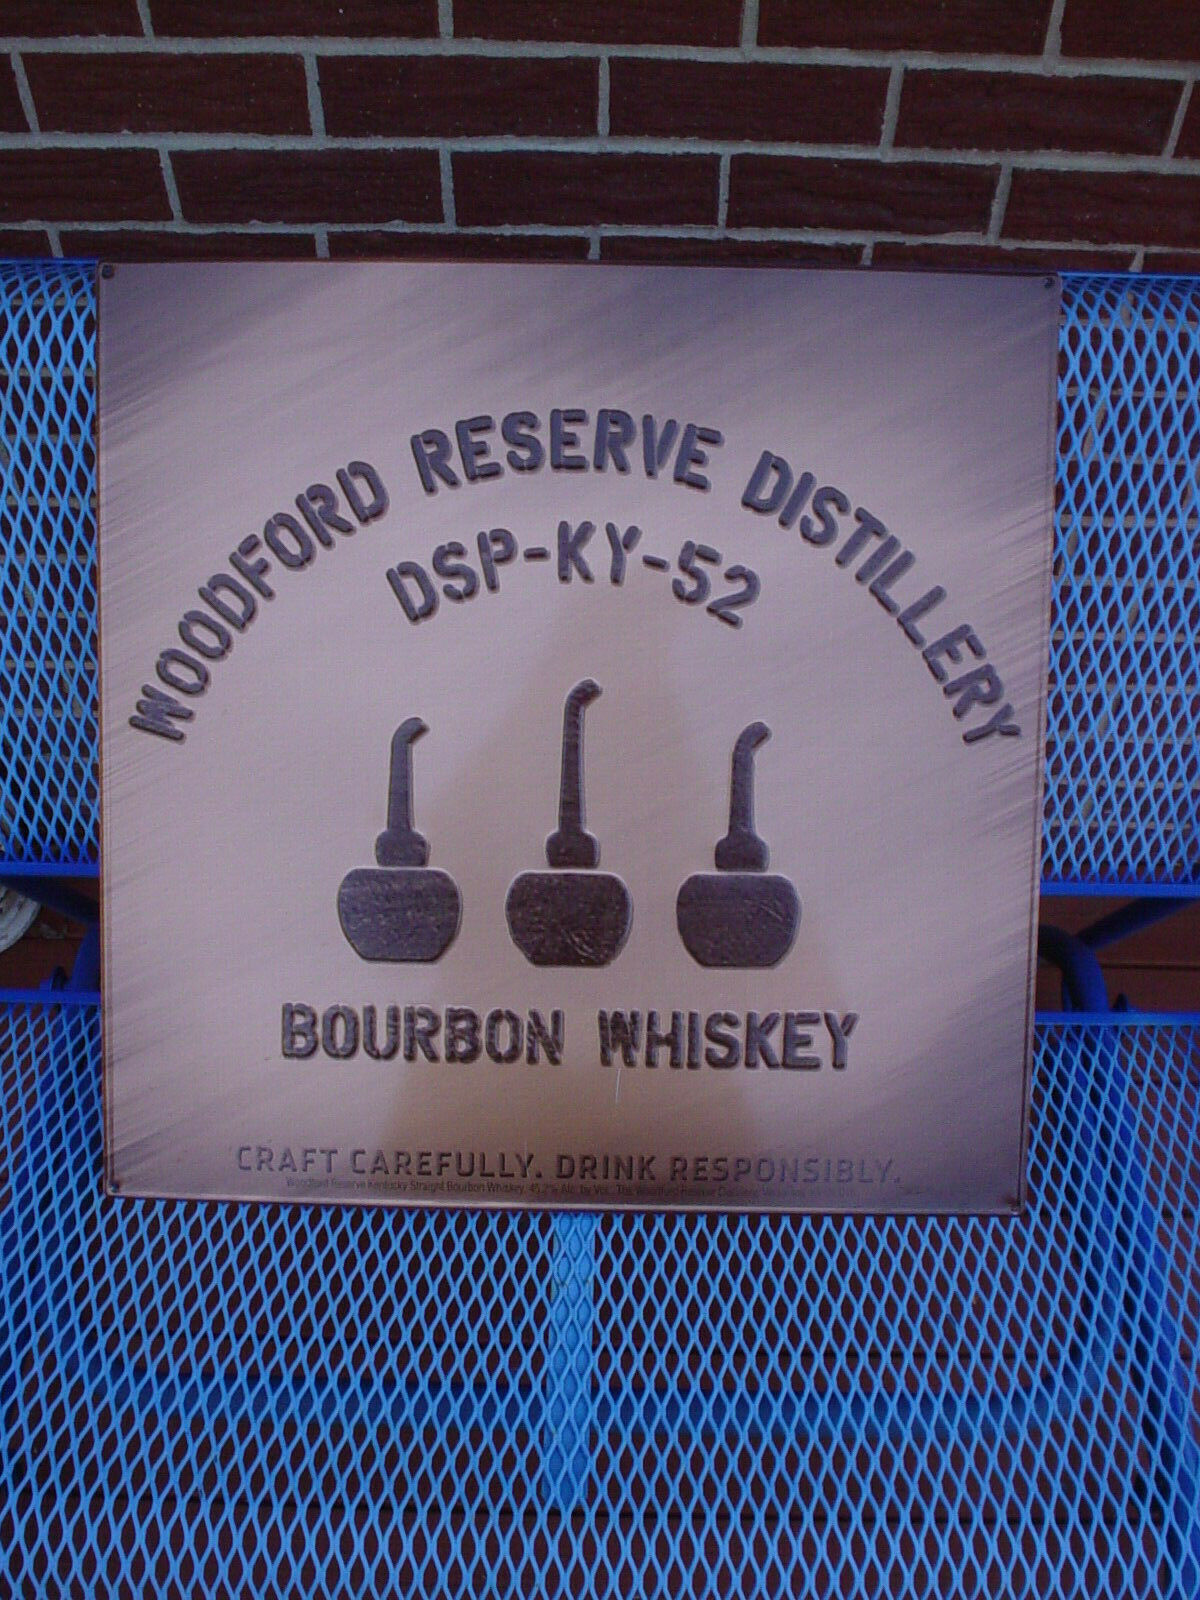 Xl. 23" Woodford Reserve Distillery Bourbon Whiskey Embossed Tin Tacker Bar Sign